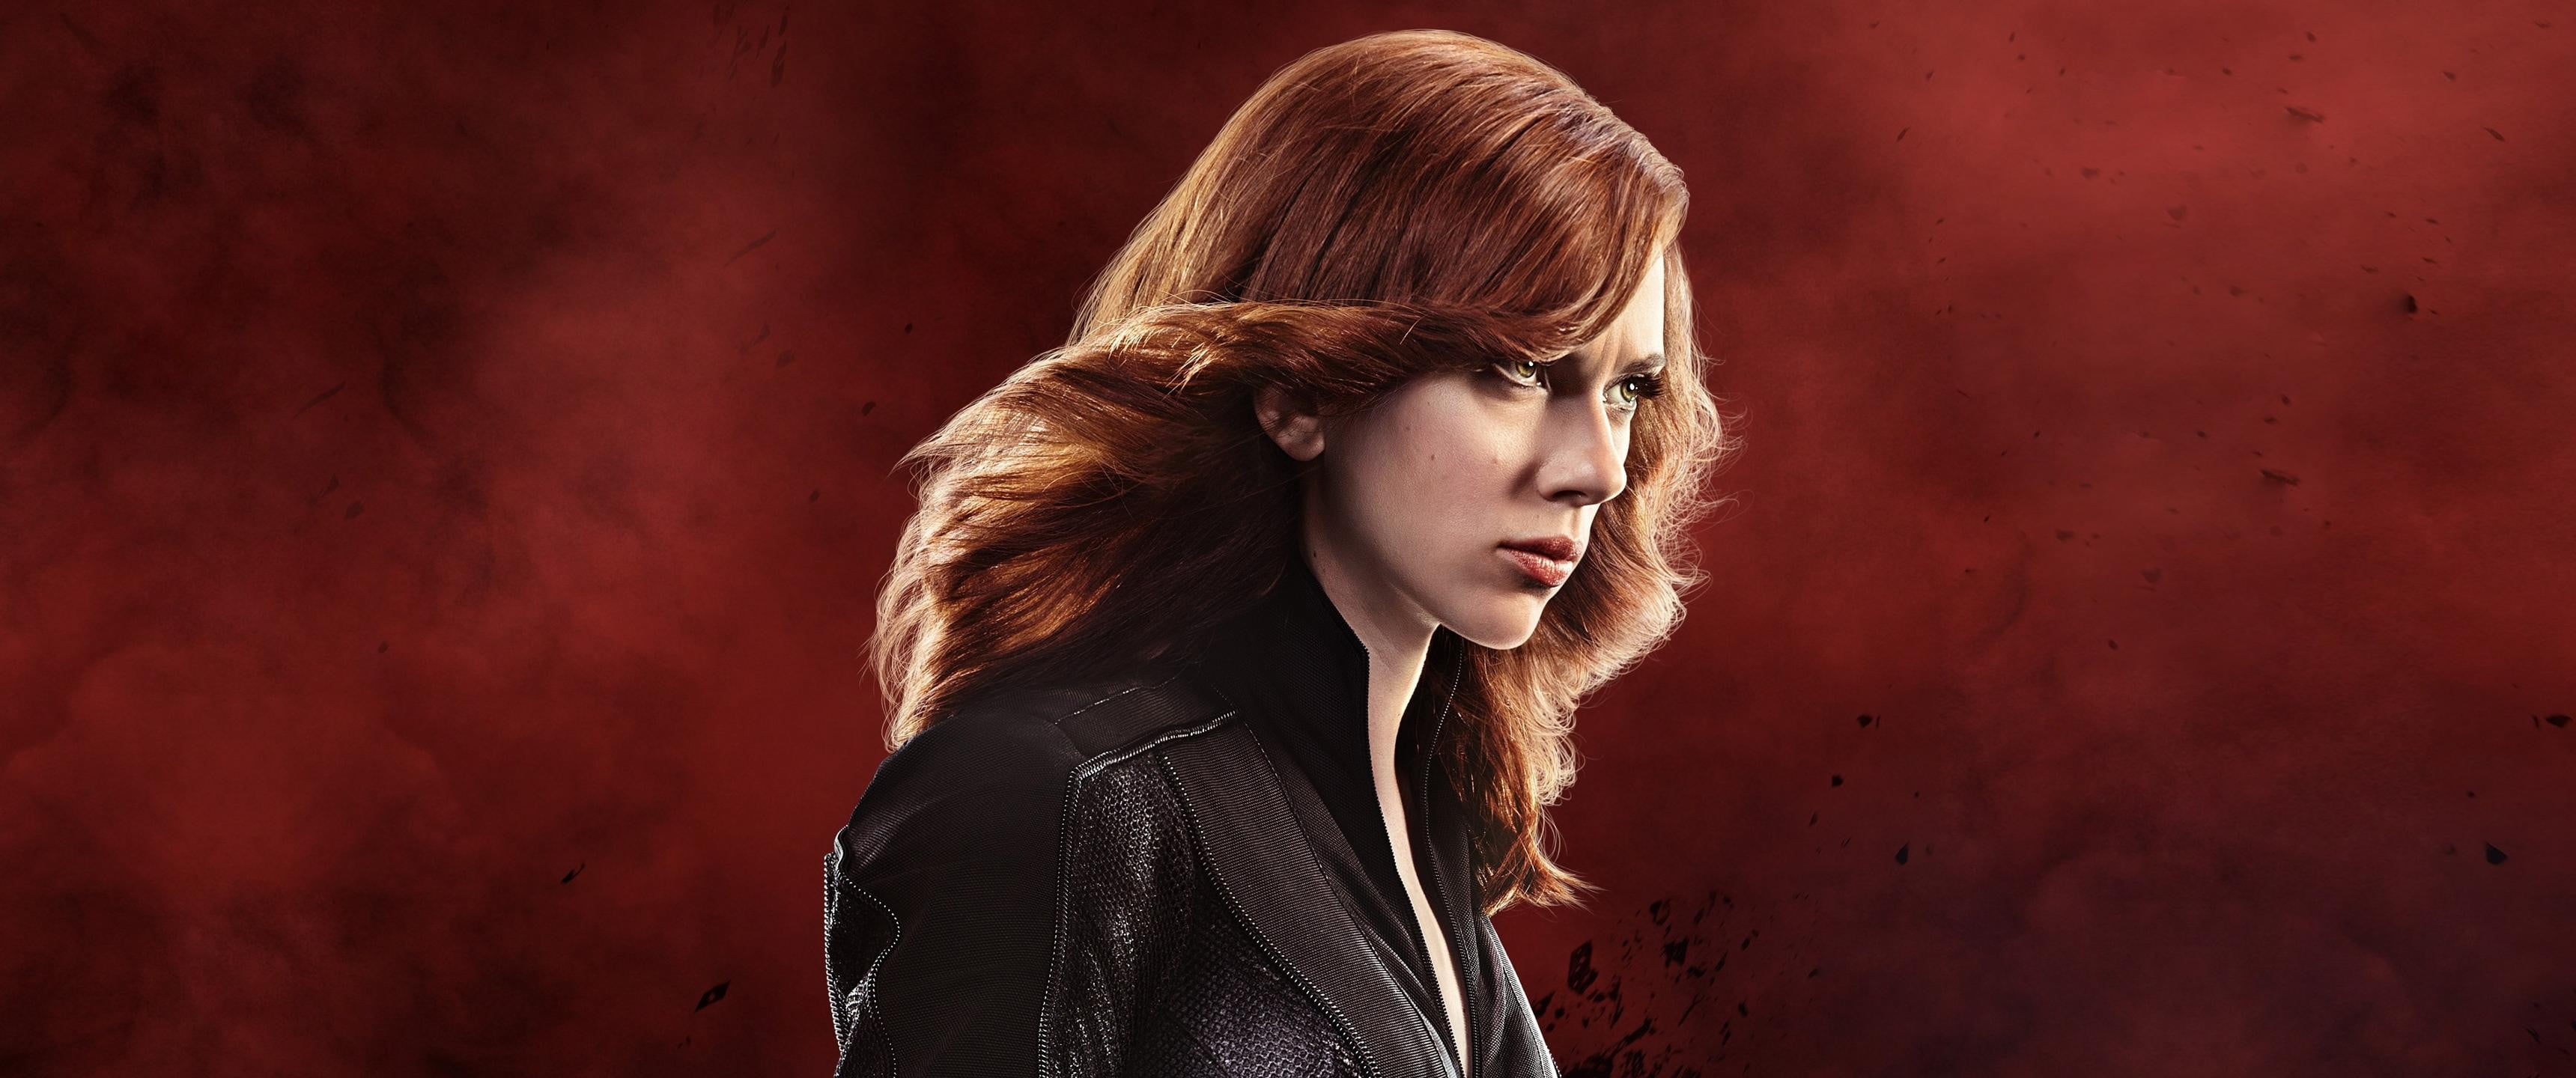 Scarlett Johansson, actress, red background, redhead, The Avengers